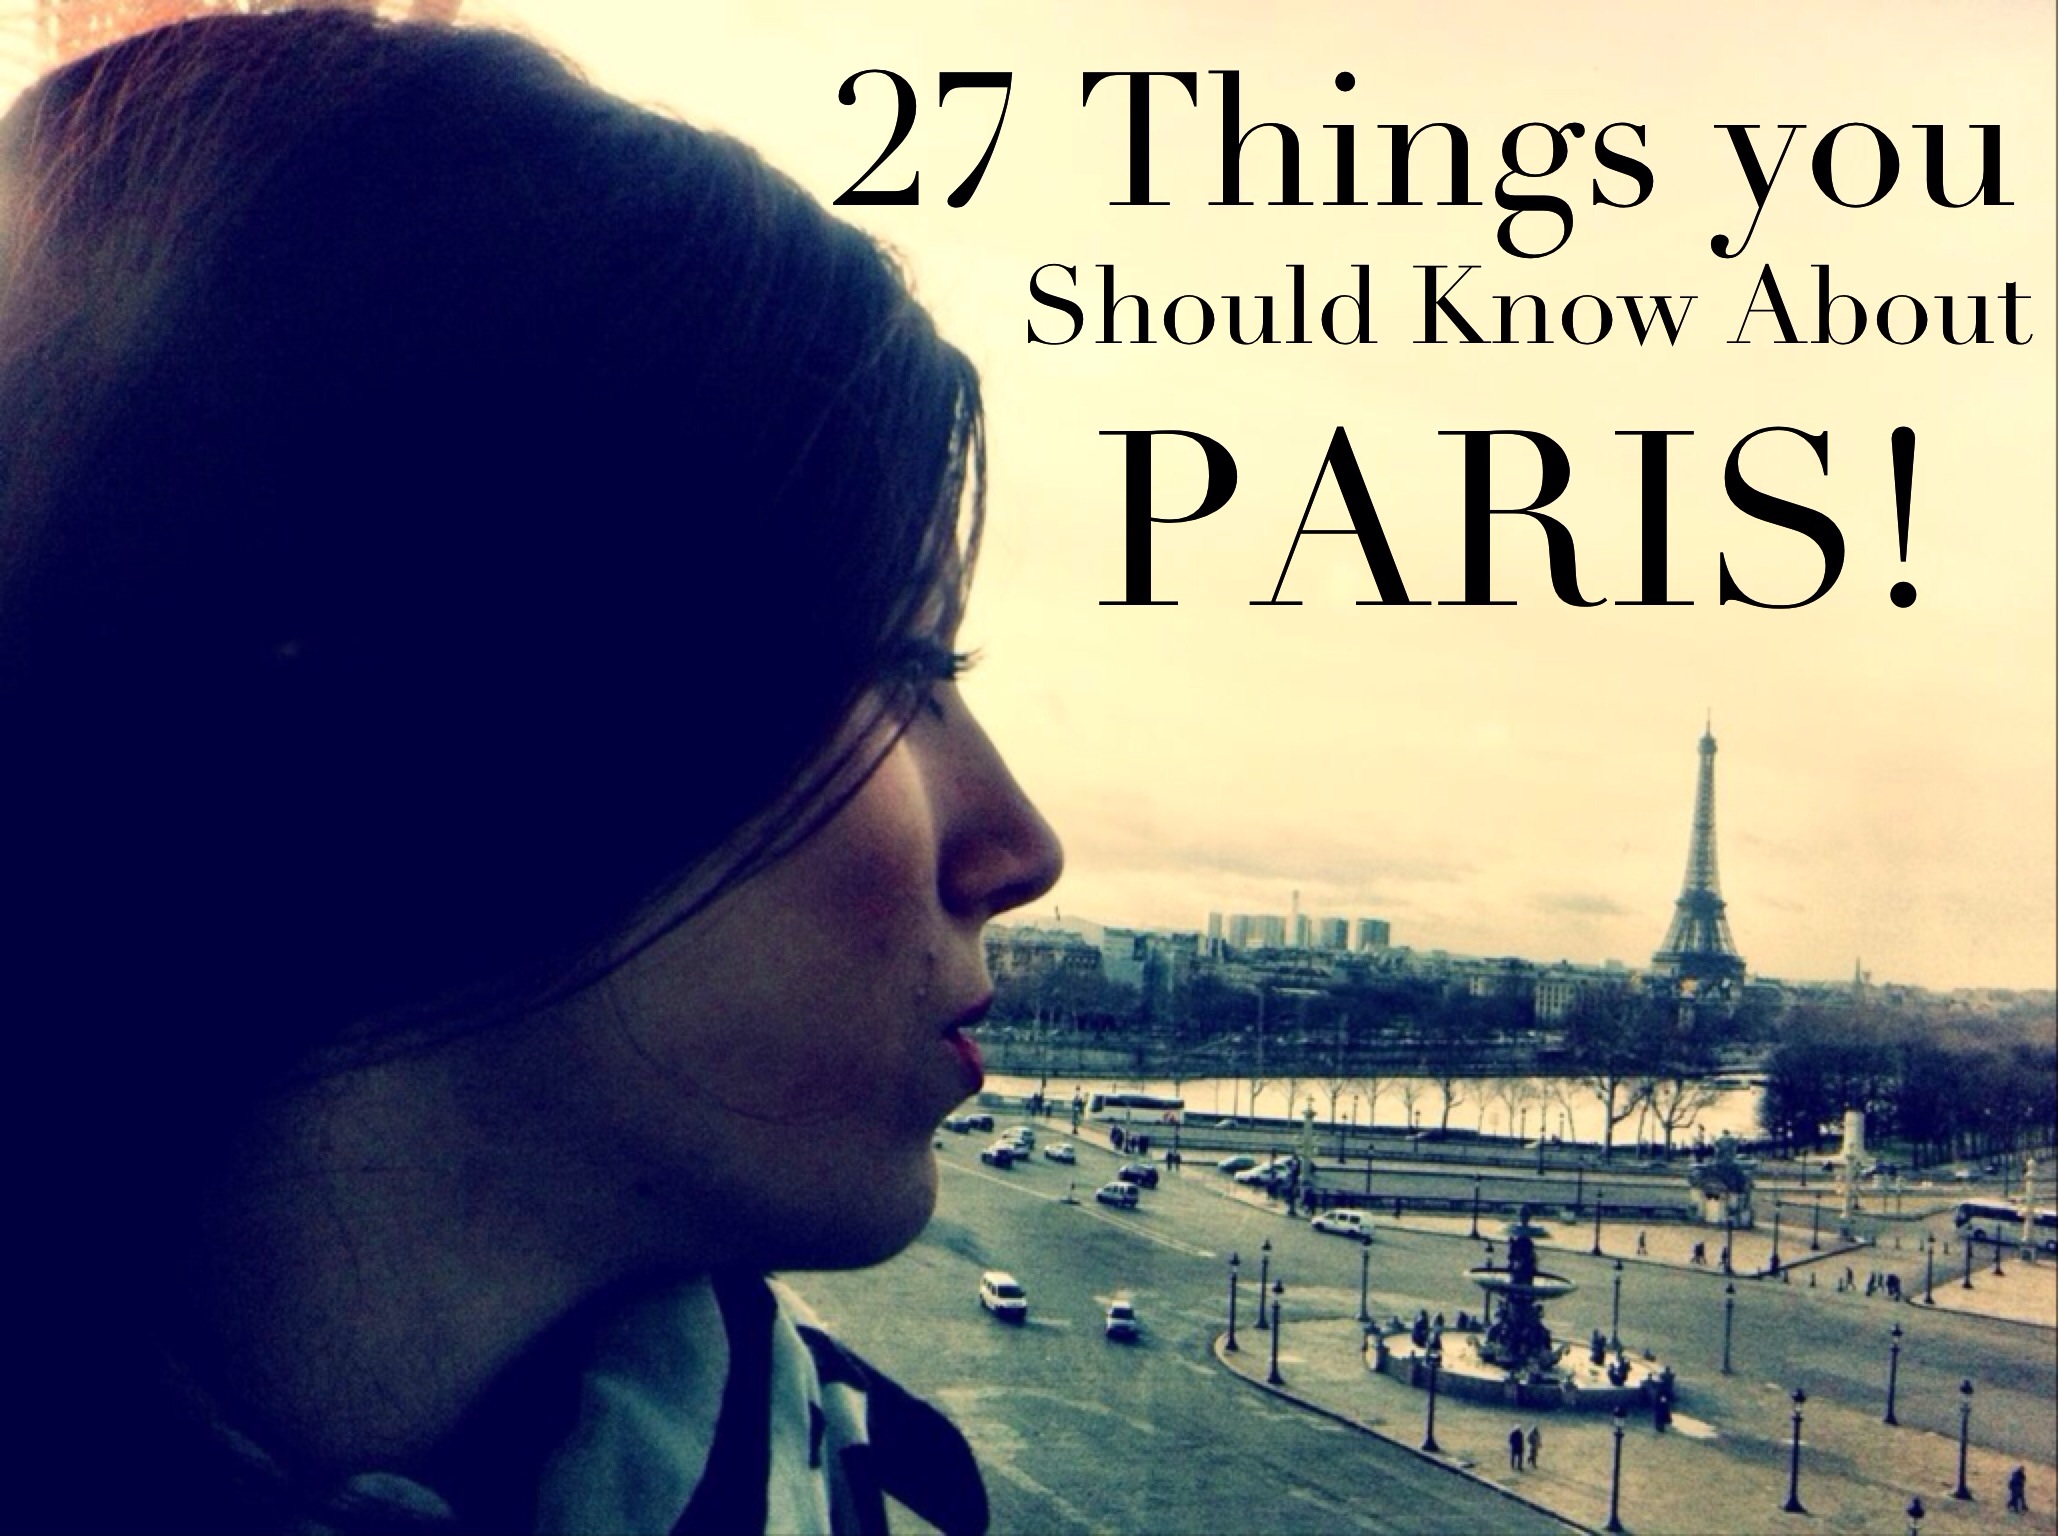 27 Things You Should Know About Paris